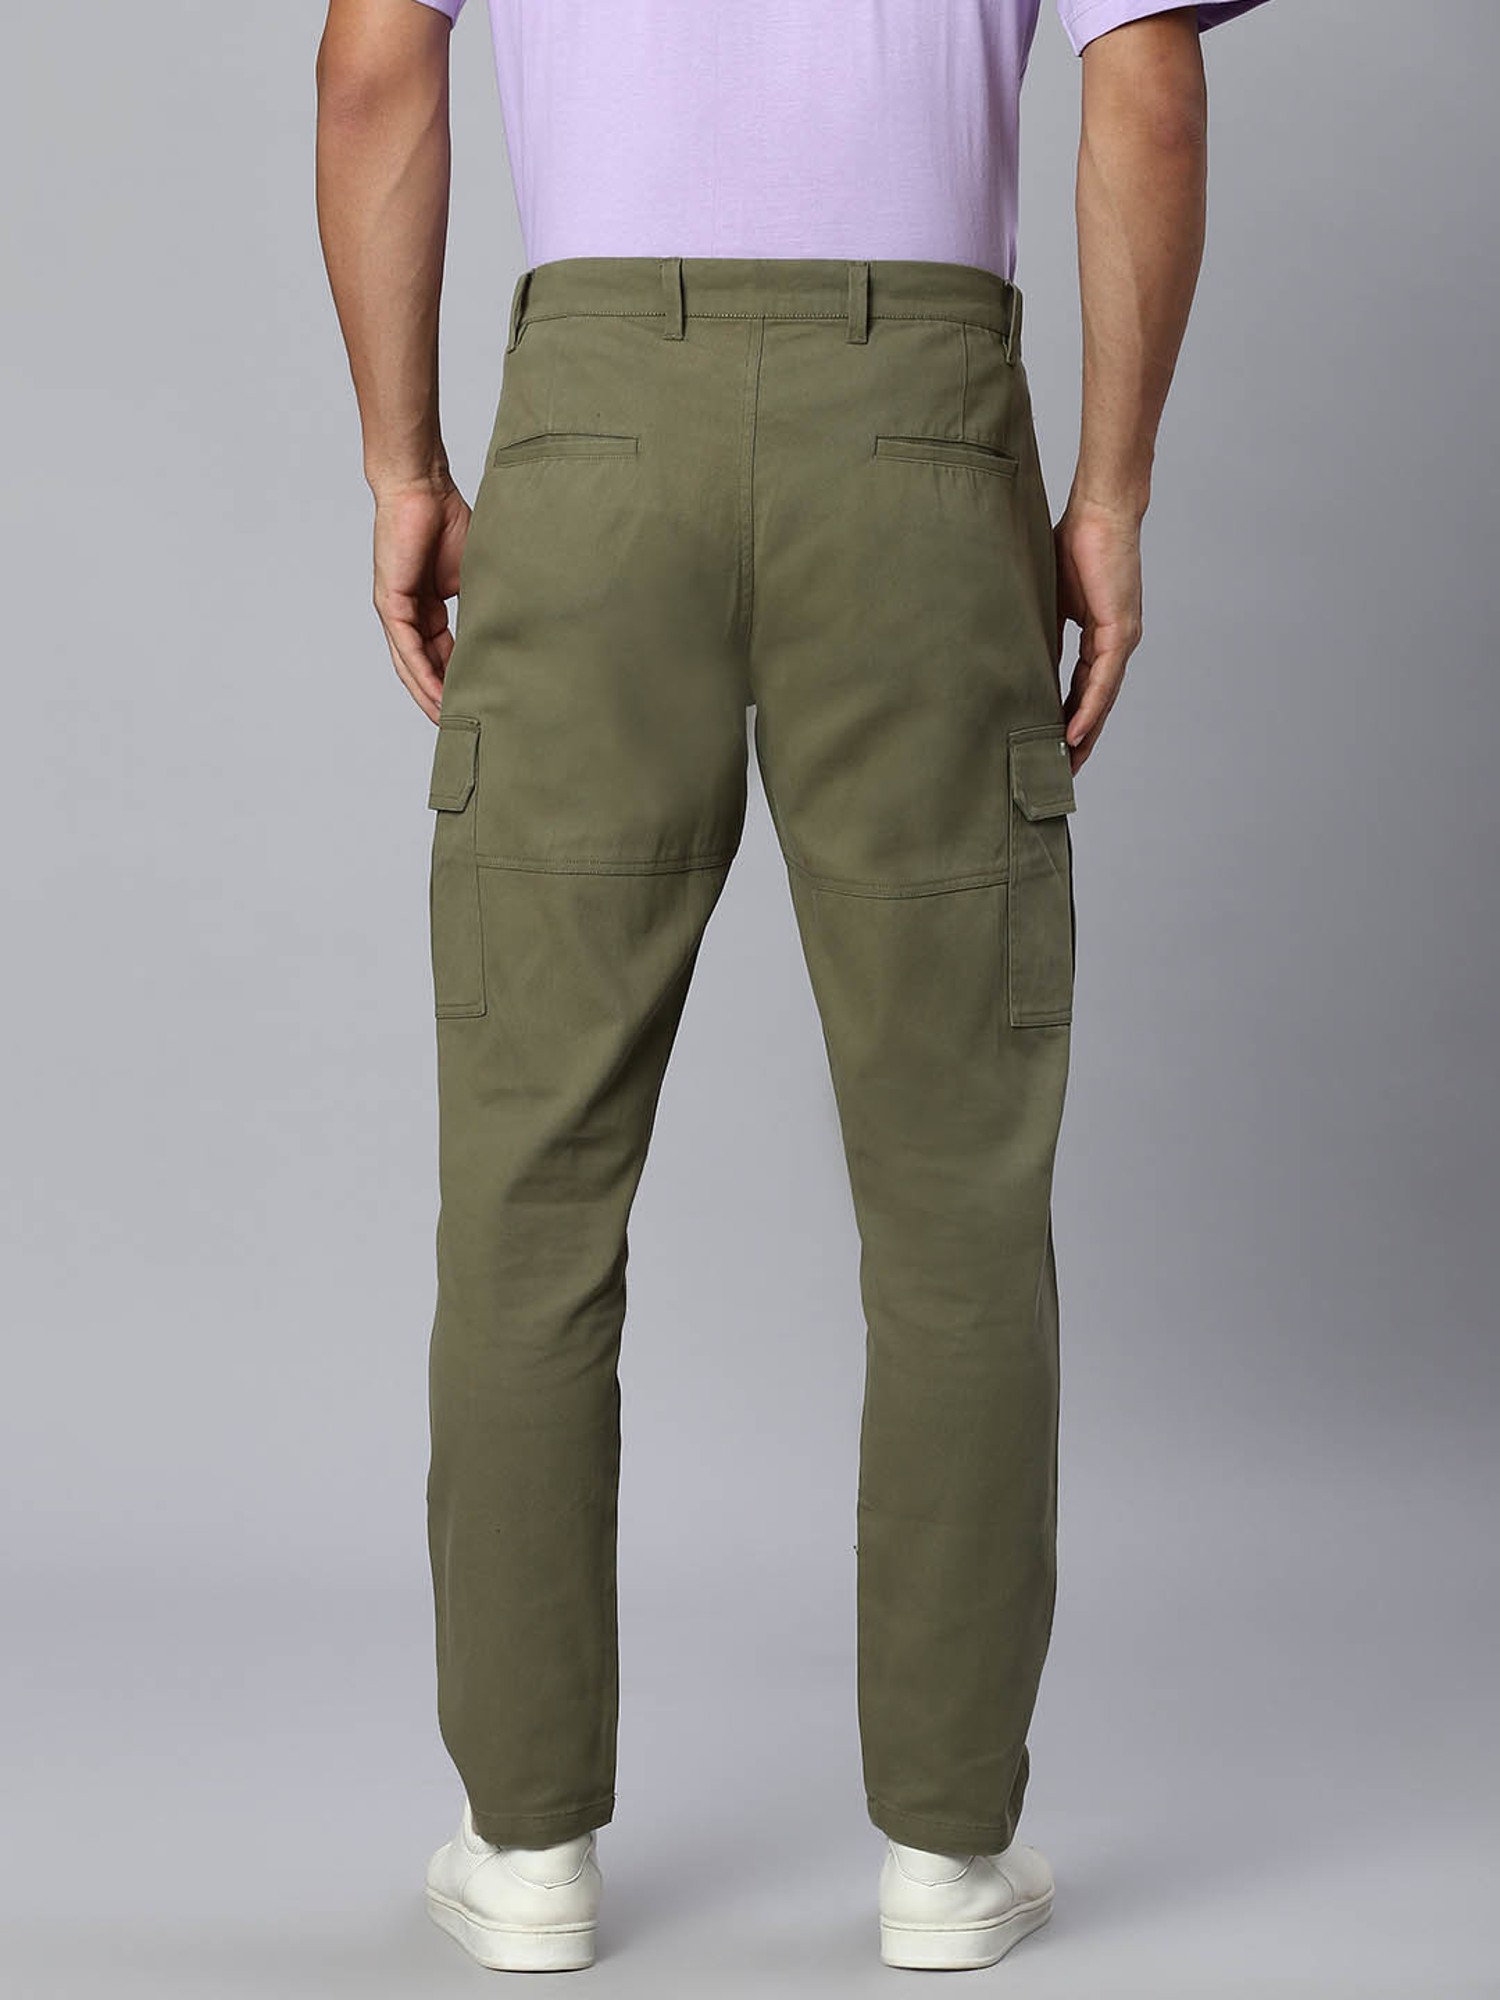 Trendy and Versatile Cargo Pants Outfit Ideas